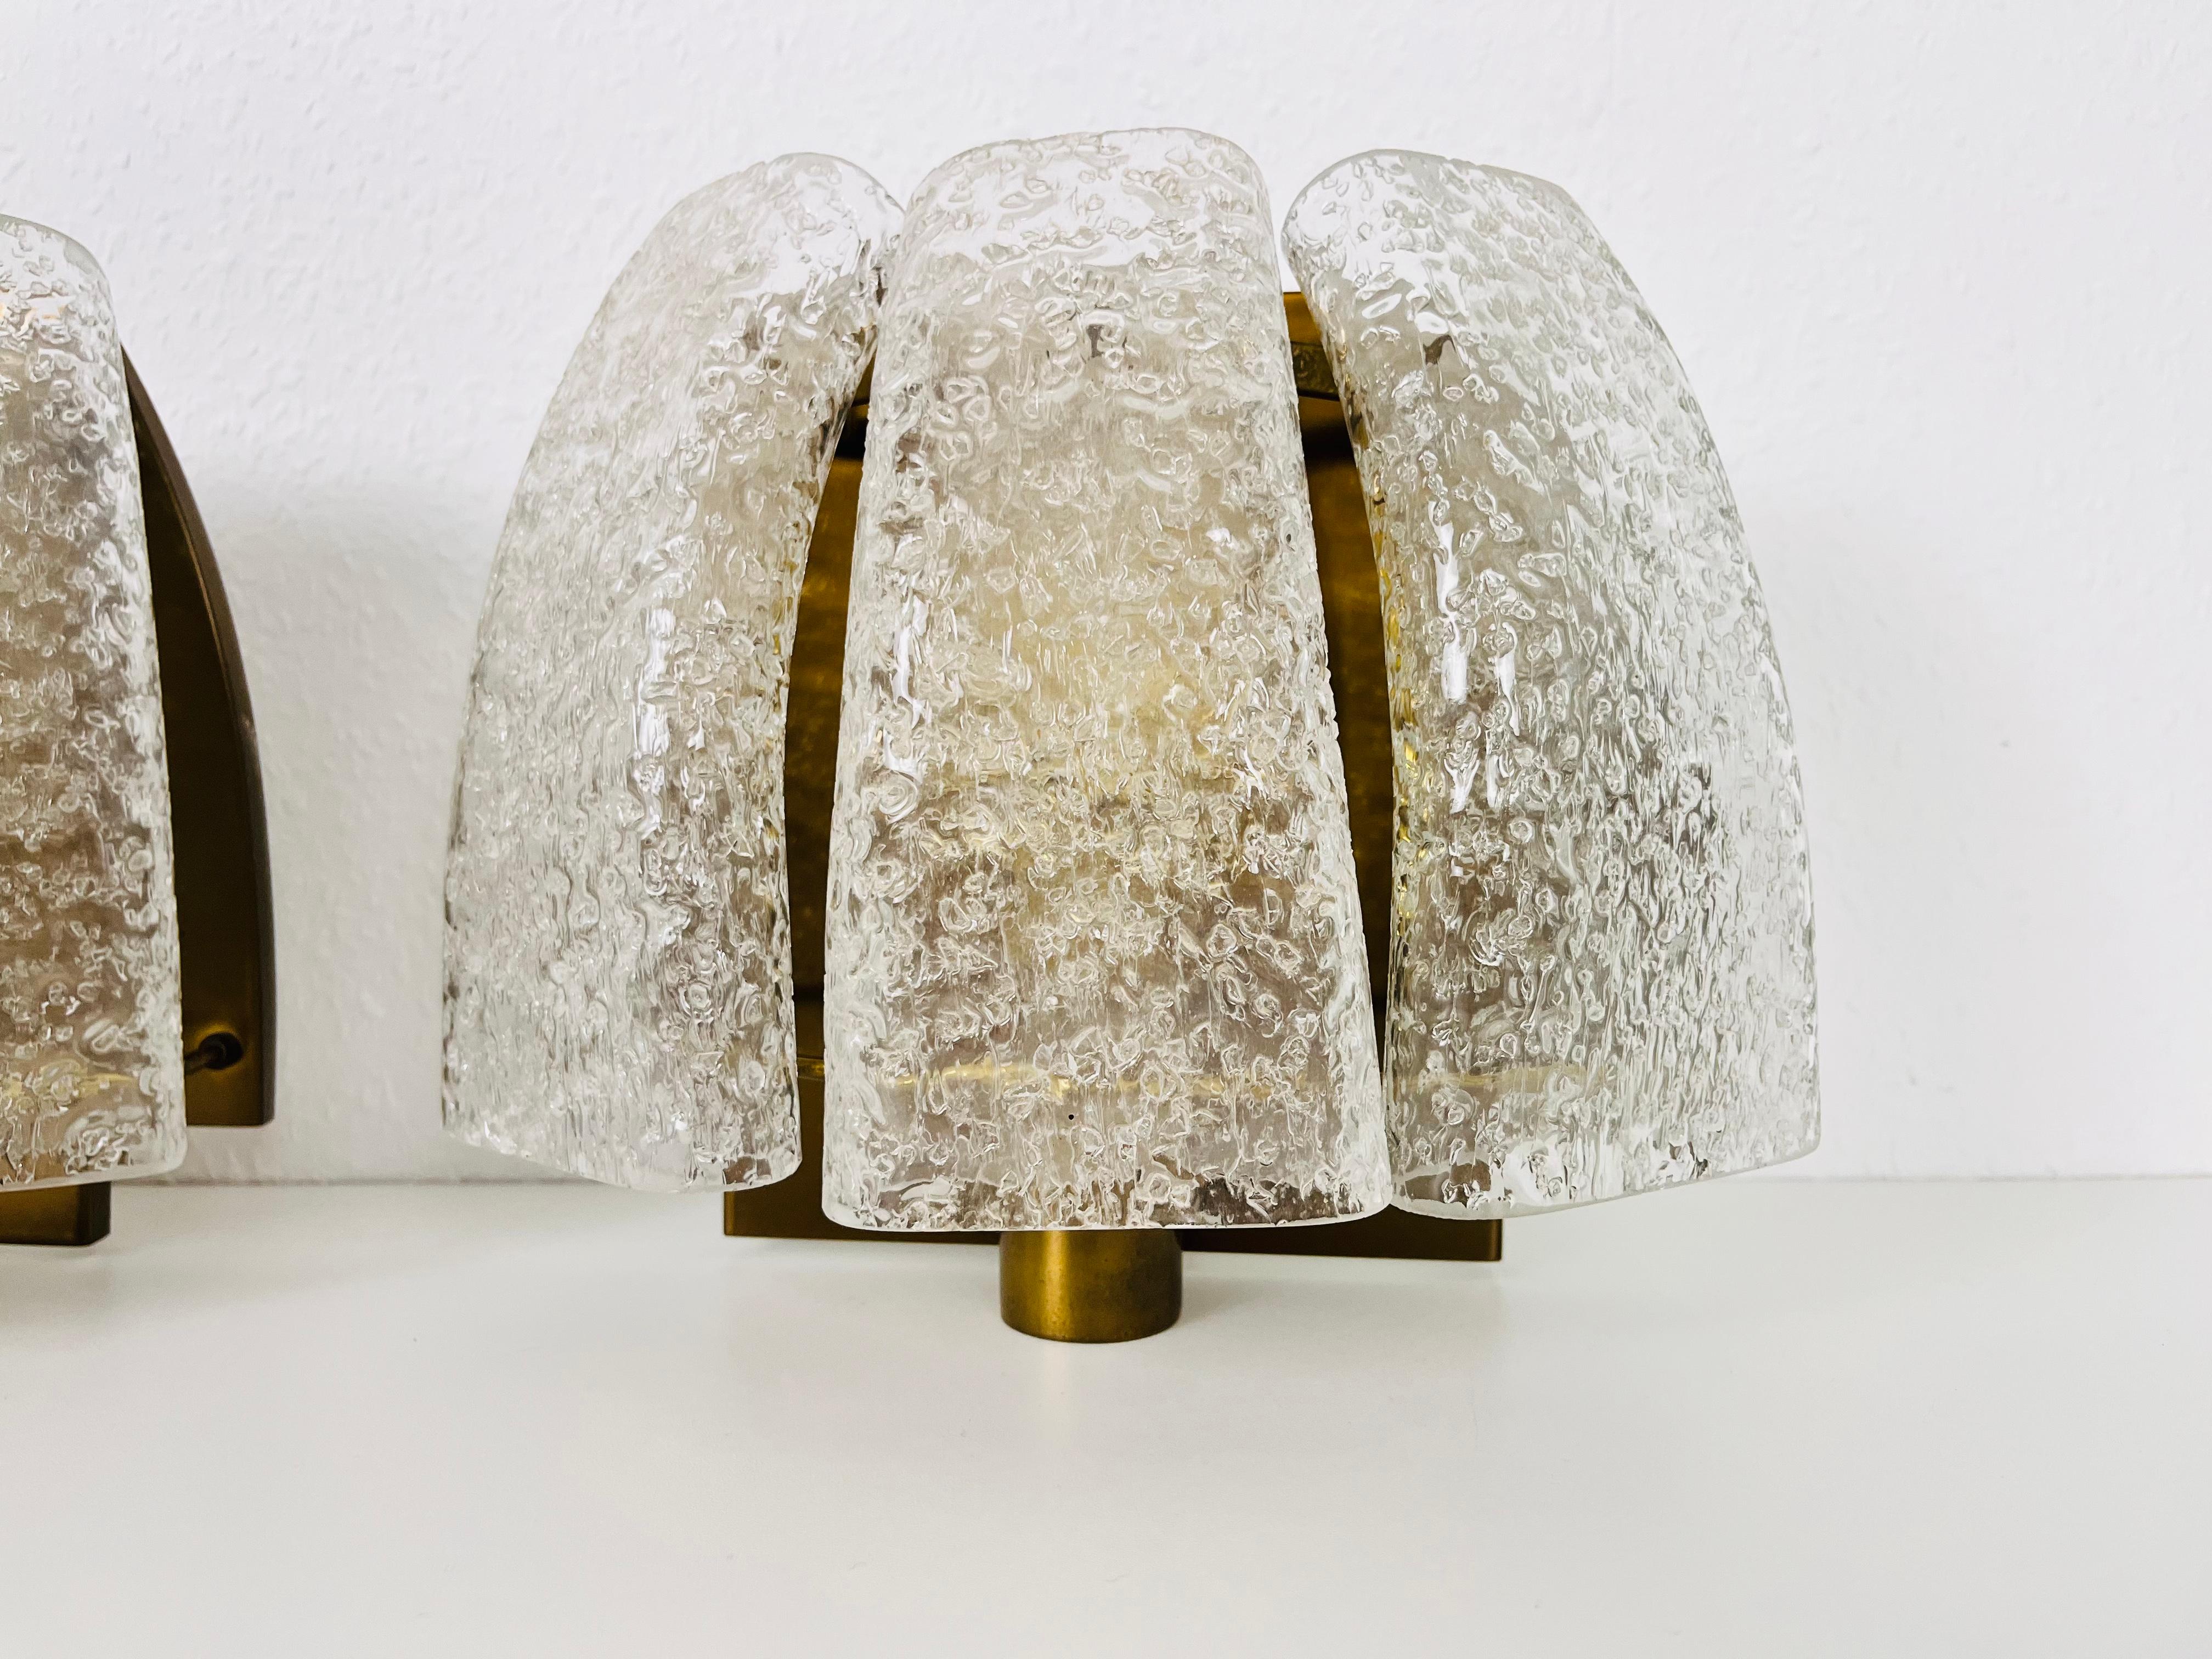 German Midcentury Pair of Blown Glass Wall Lamps by Doria, 1960s For Sale